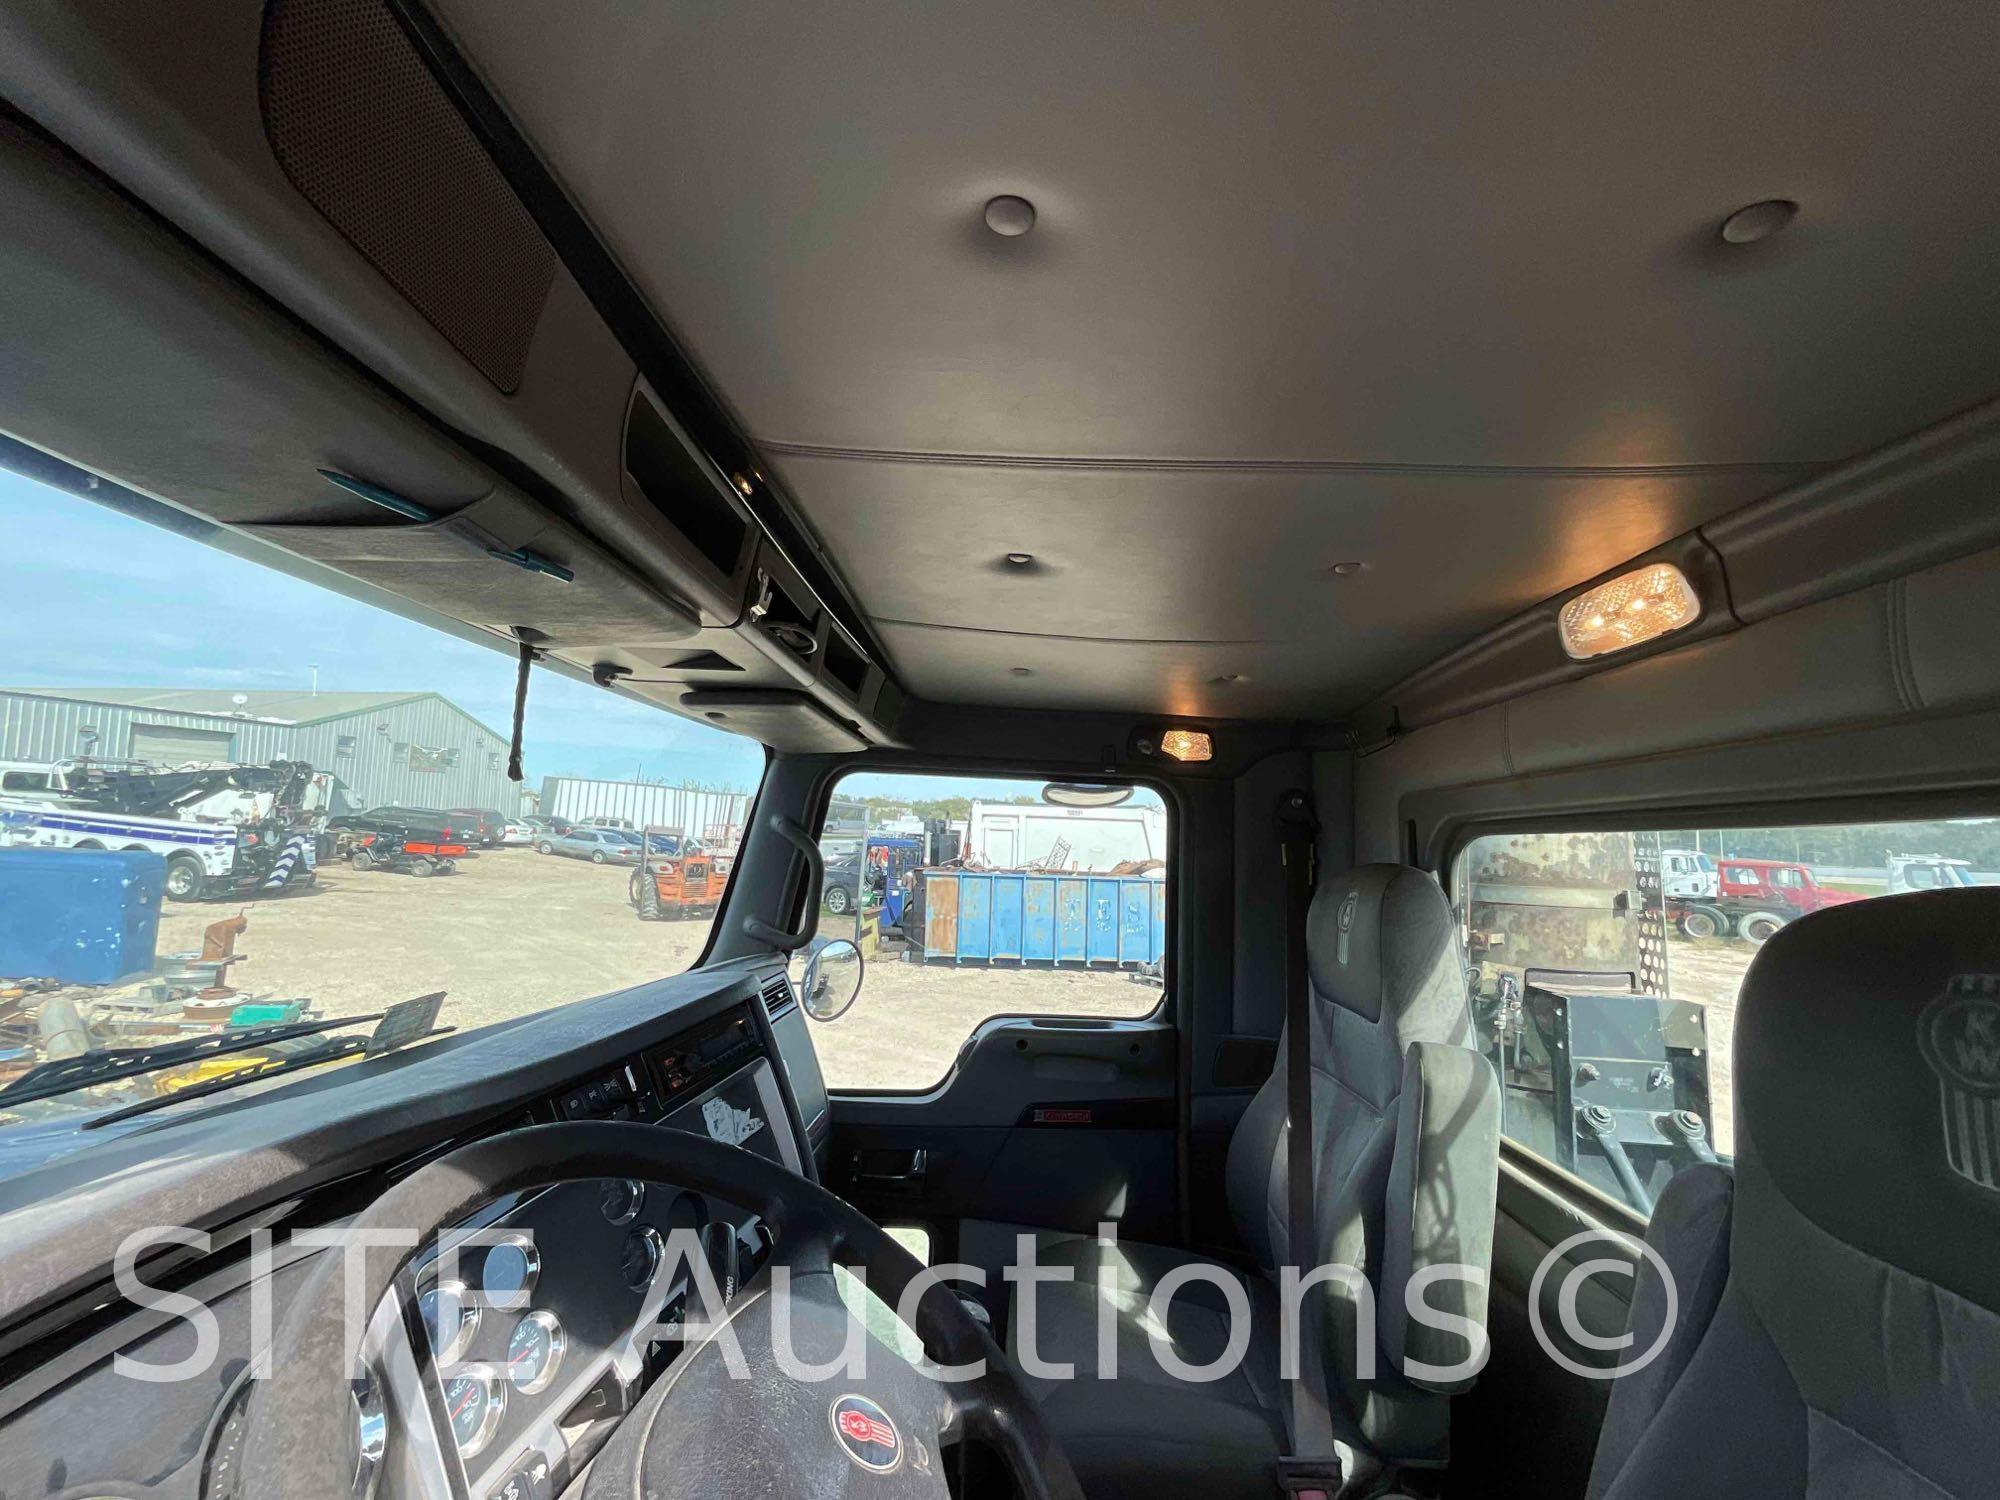 2008 Kenworth T800 T/A Daycab Truck Tractor